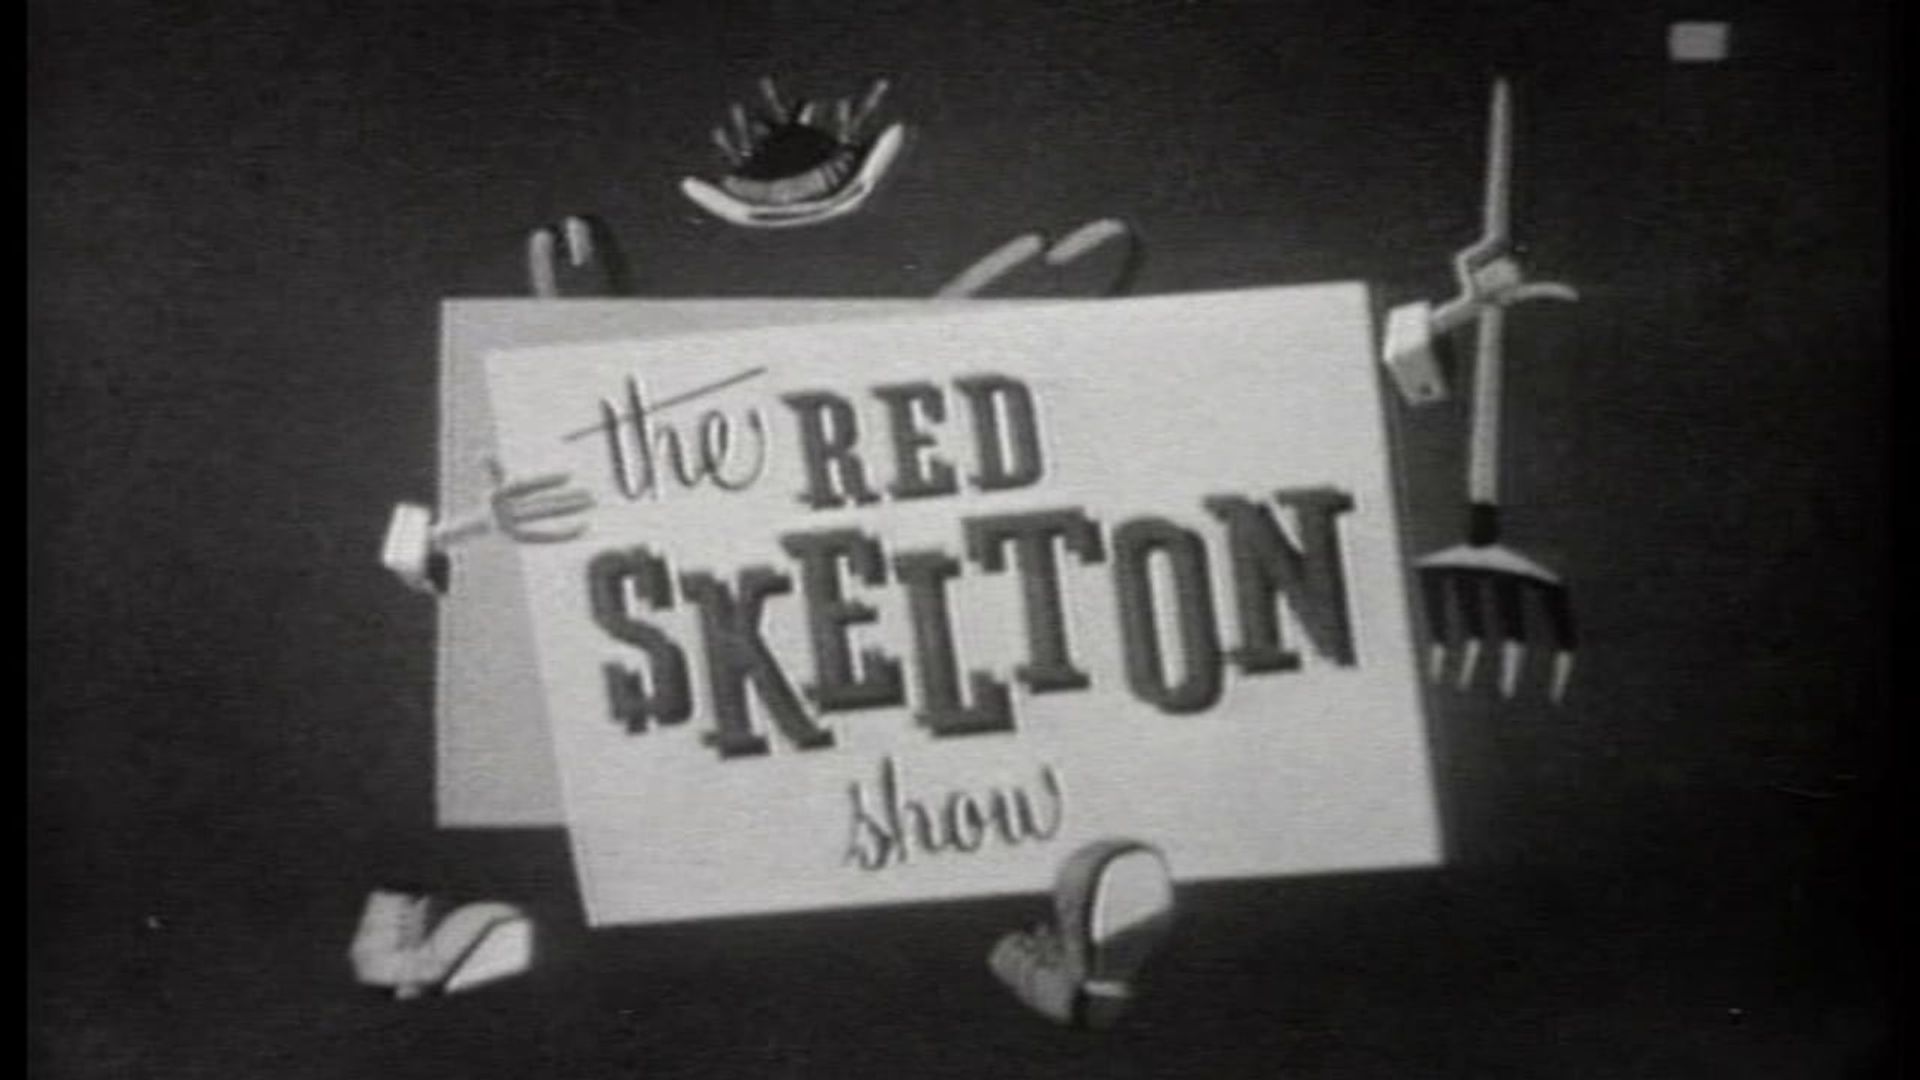 The Red Skelton Show background